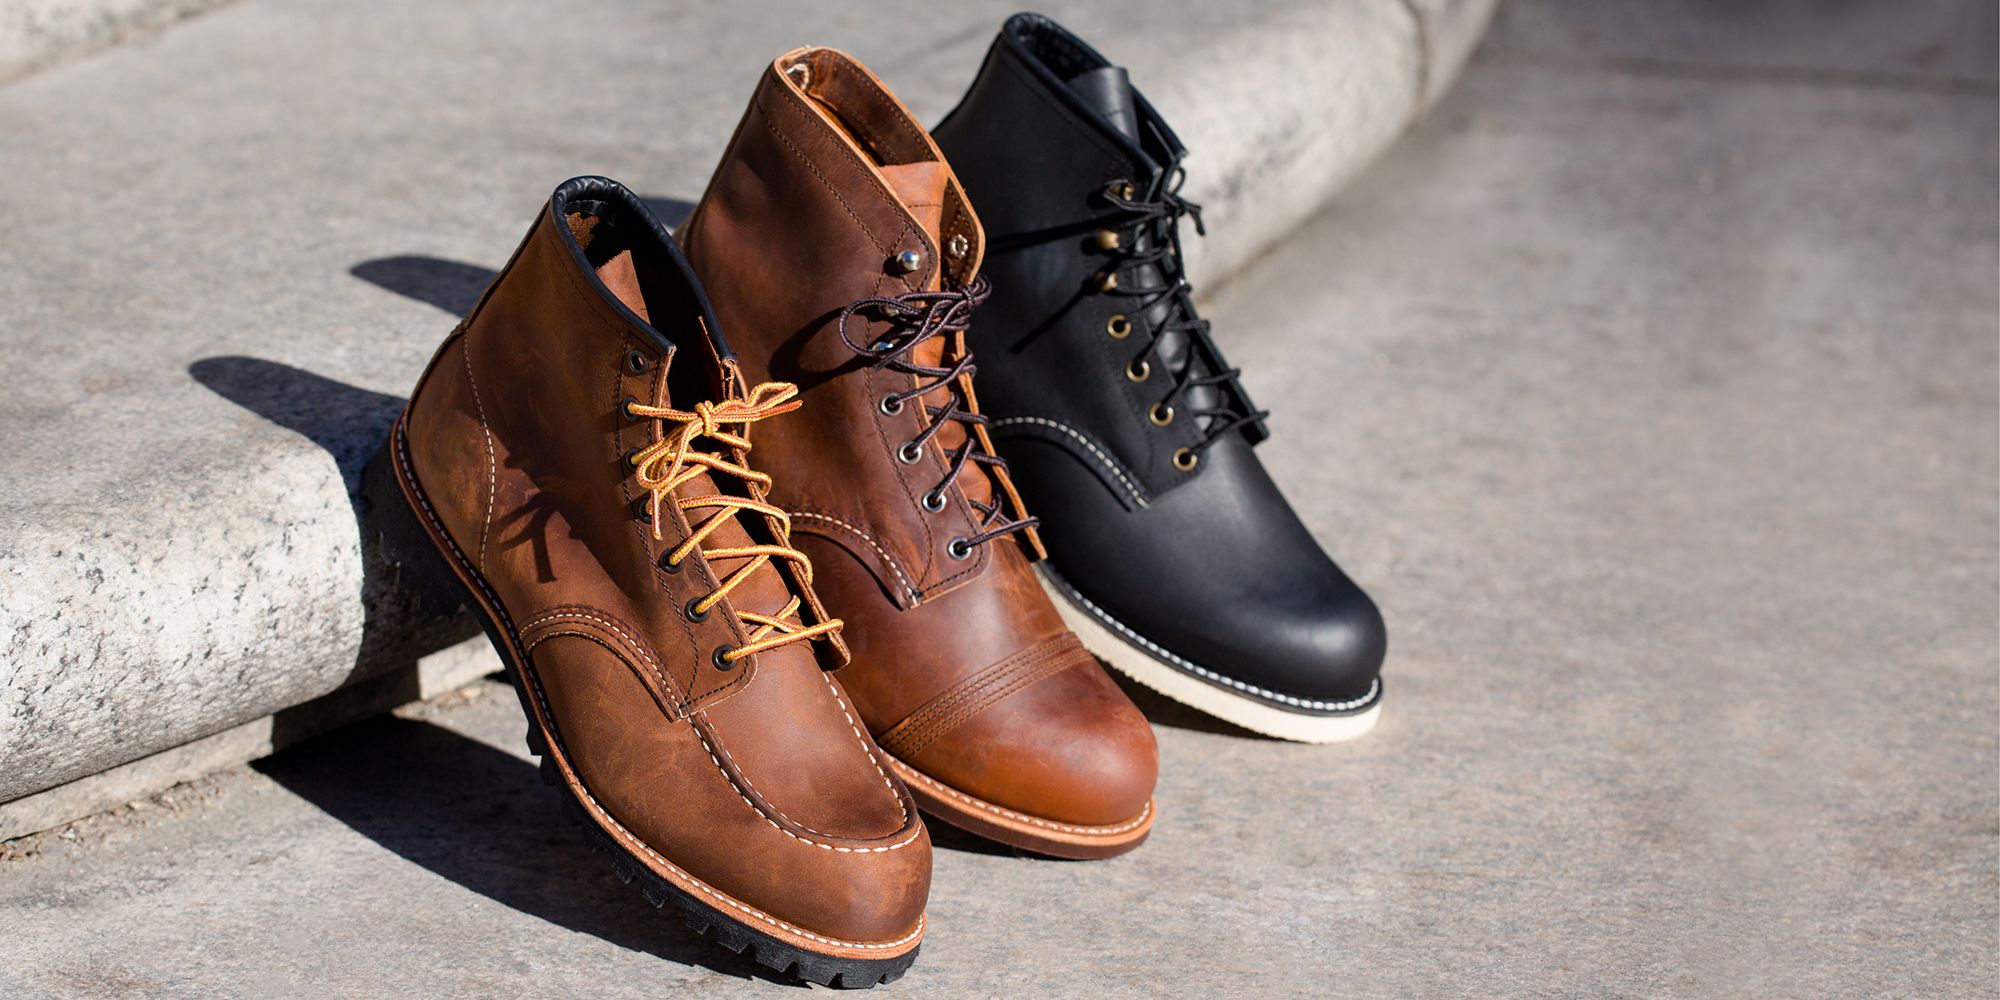 J.Crew Red Wing Launch Collaboration - This Red Wing J.Crew Boot